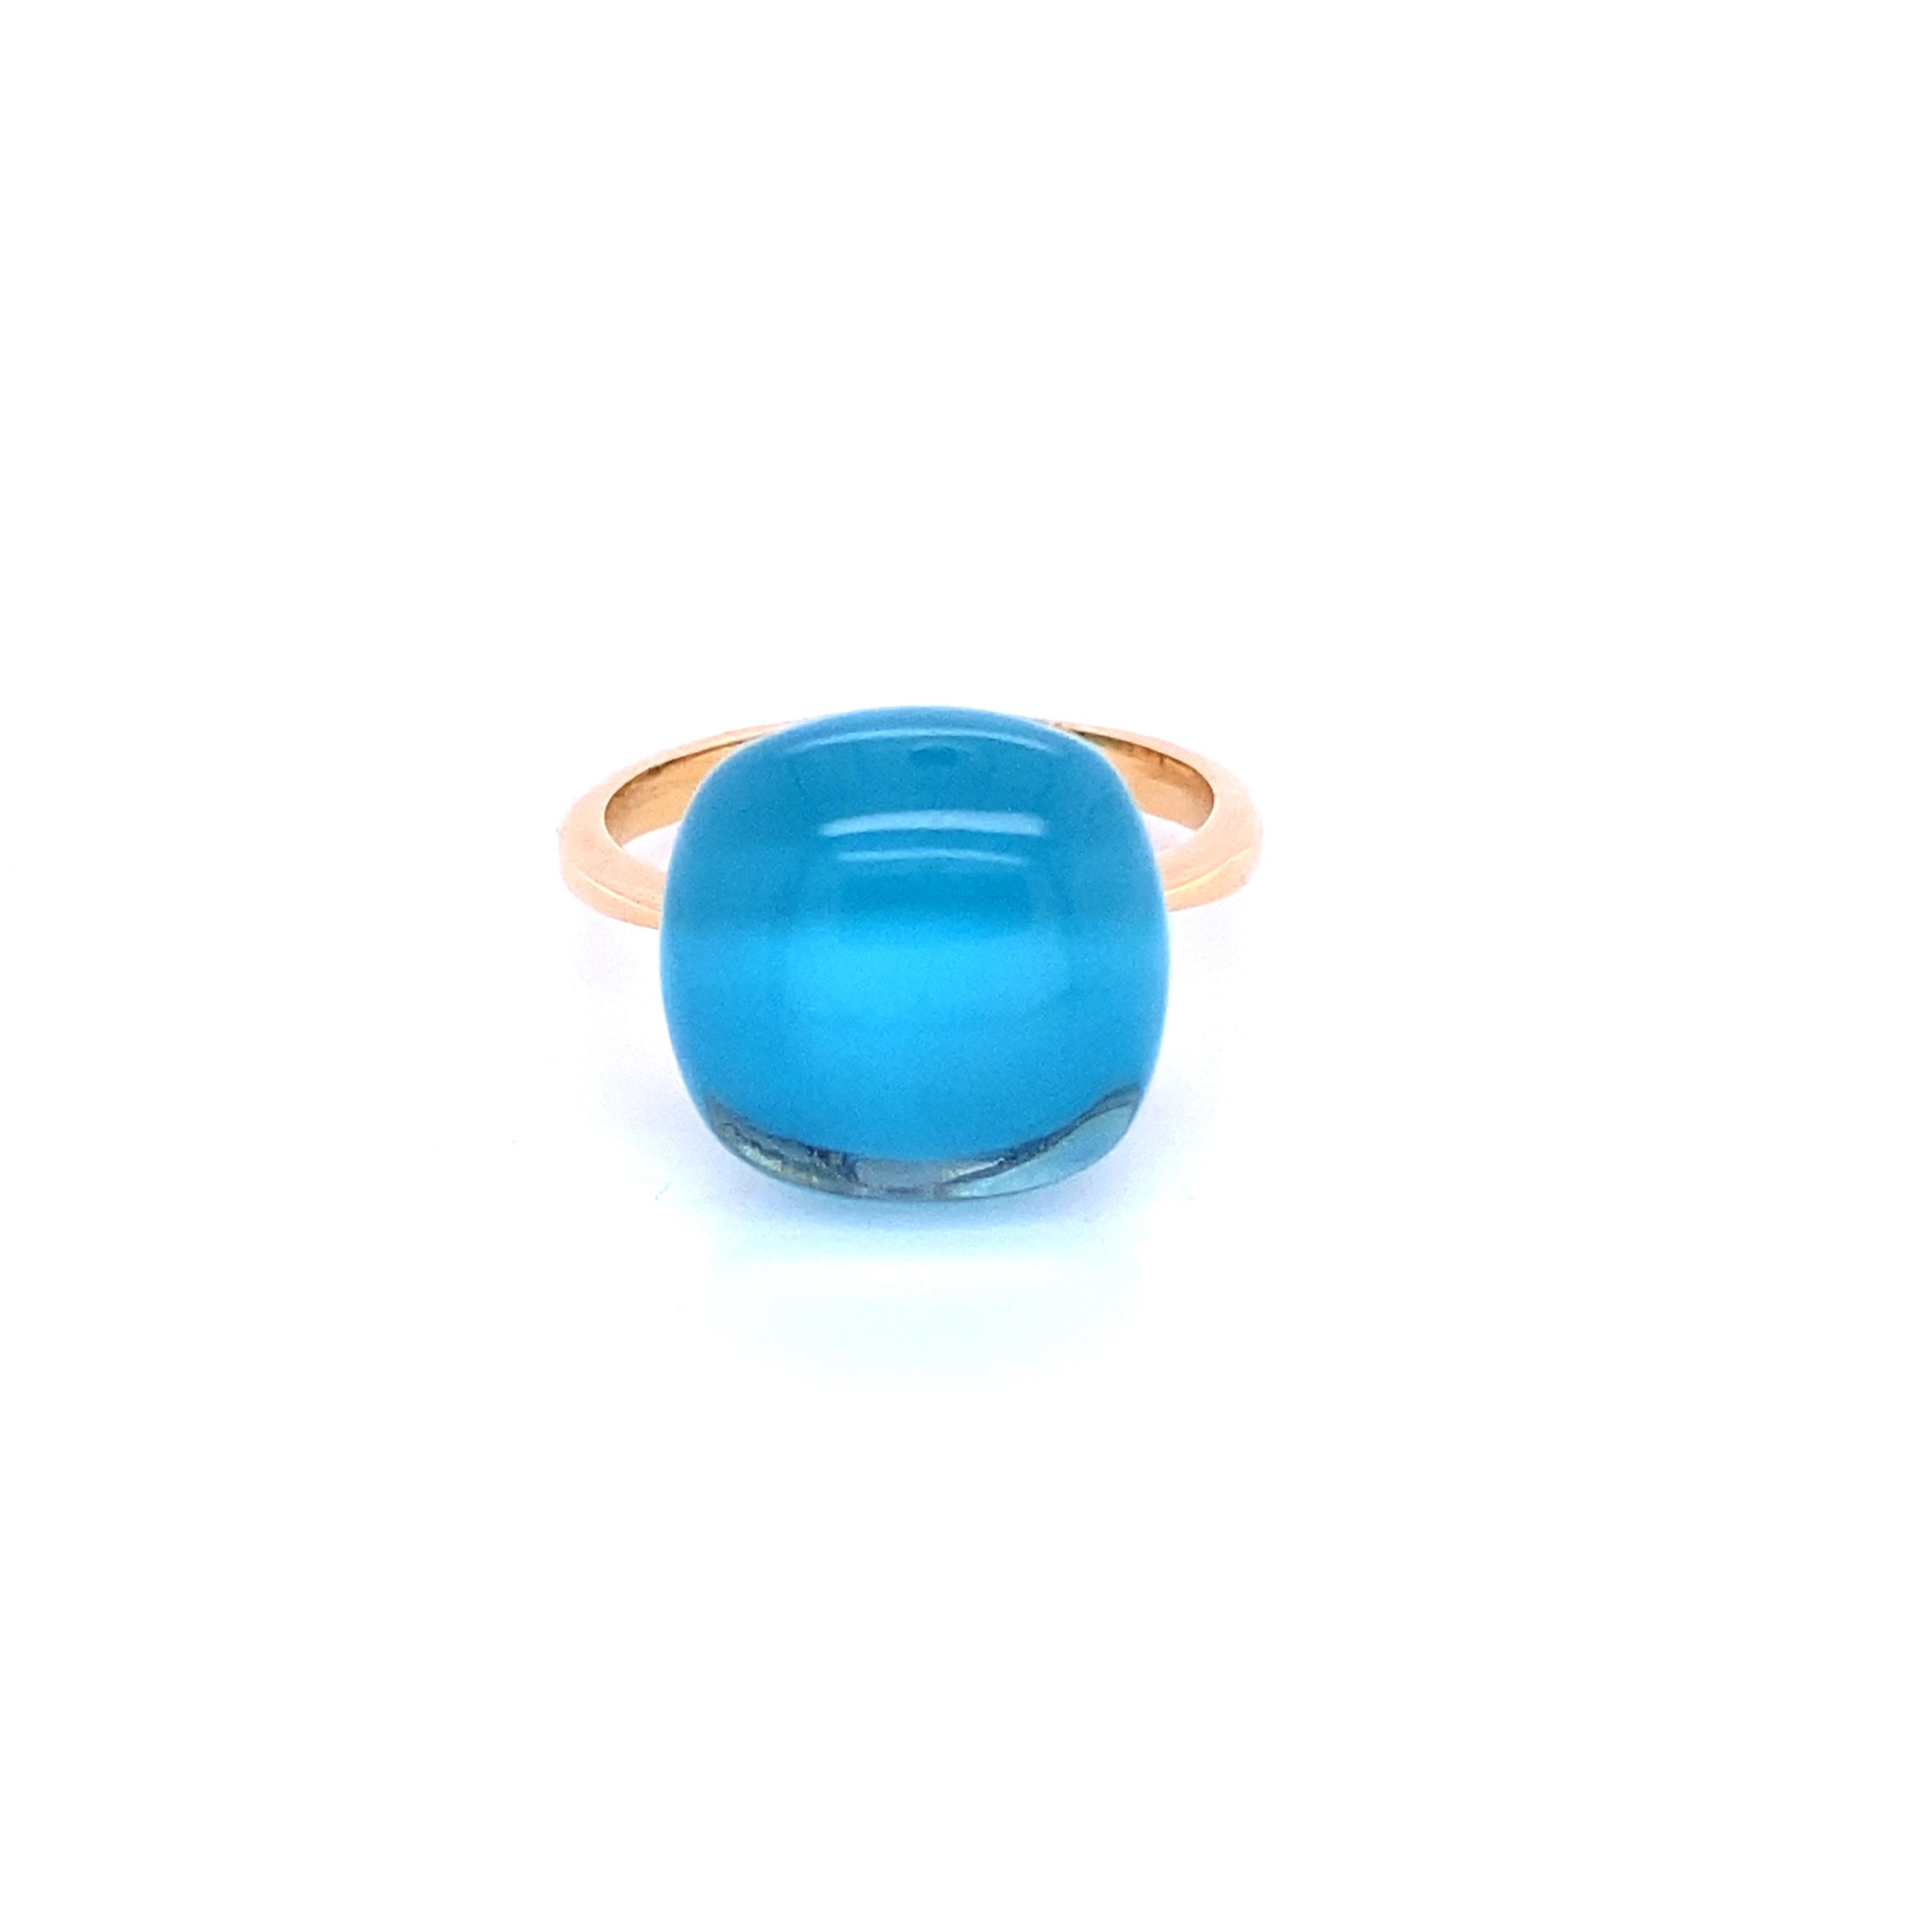 Crafted with the utmost precision and care, this cocktail ring showcases a magnificent combination of pink gold, topaz, and turquoise, resulting in an unparalleled masterpiece. The focal point of this ring is a breathtaking topaz gemstone, gracing